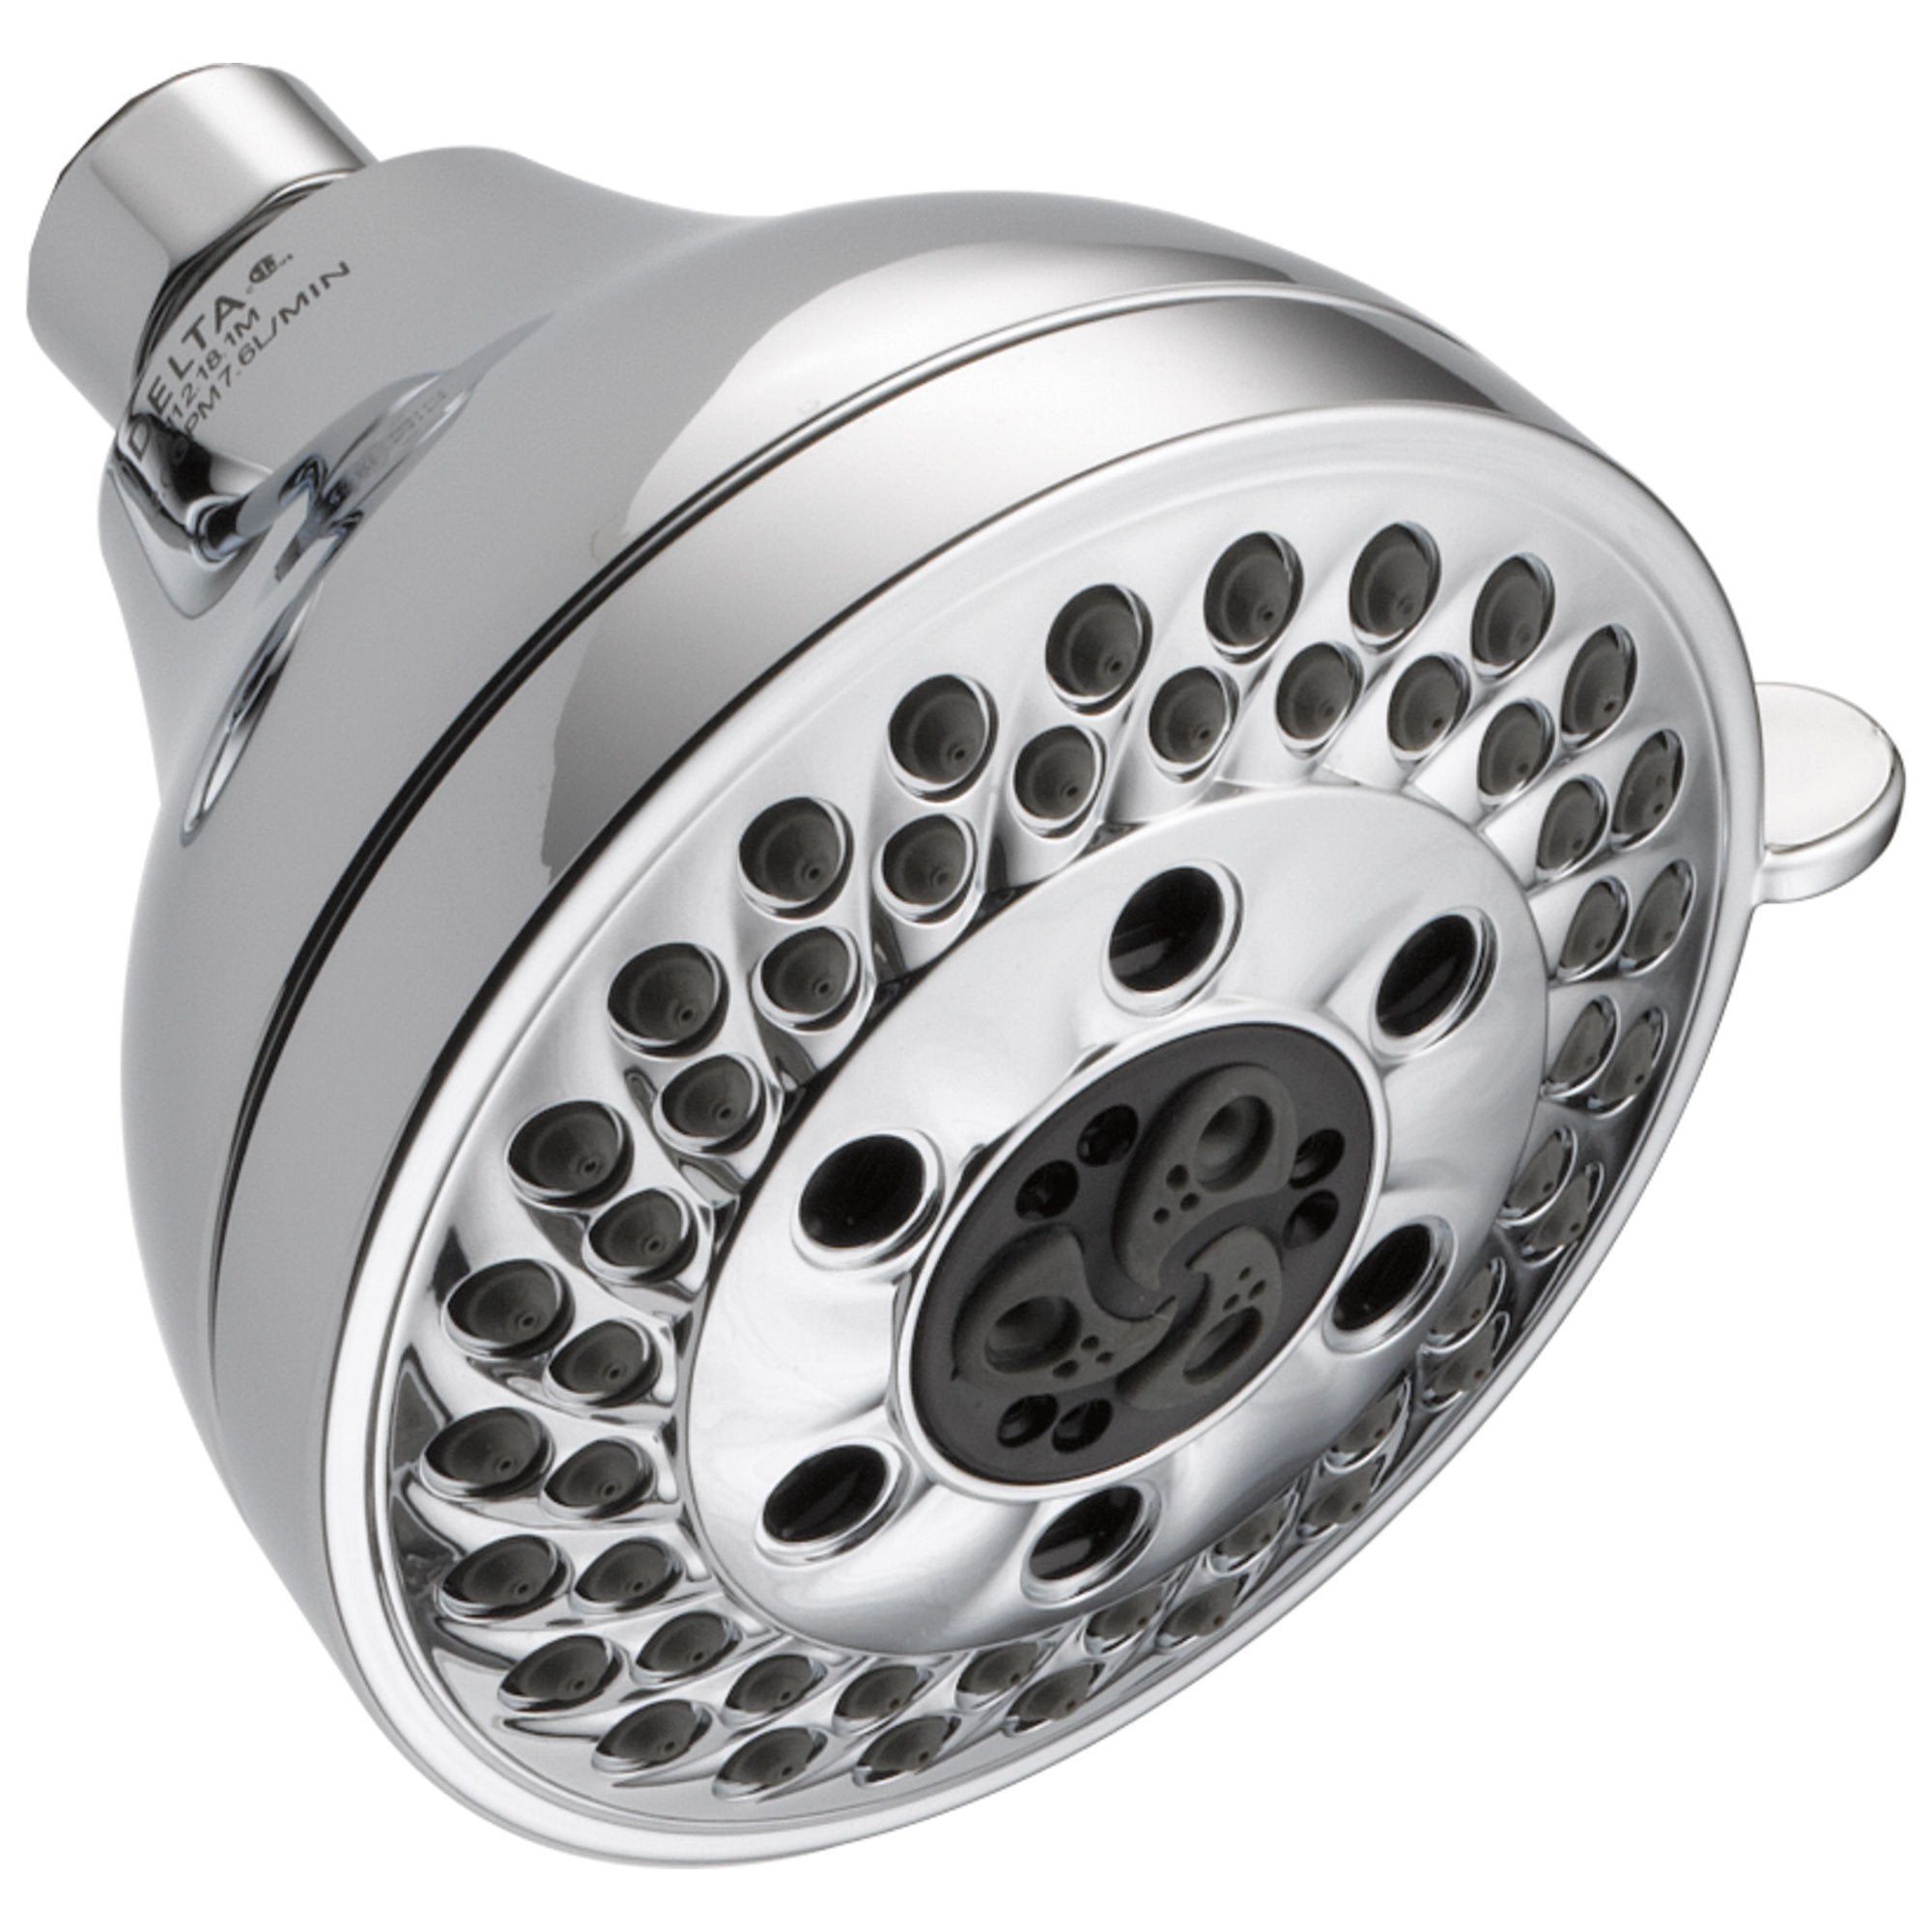 Delta Universal Showering Components Collection Chrome Finish H2Okinetic 5-Setting 1.5GPM Watersense Water Efficient Shower Head 667526